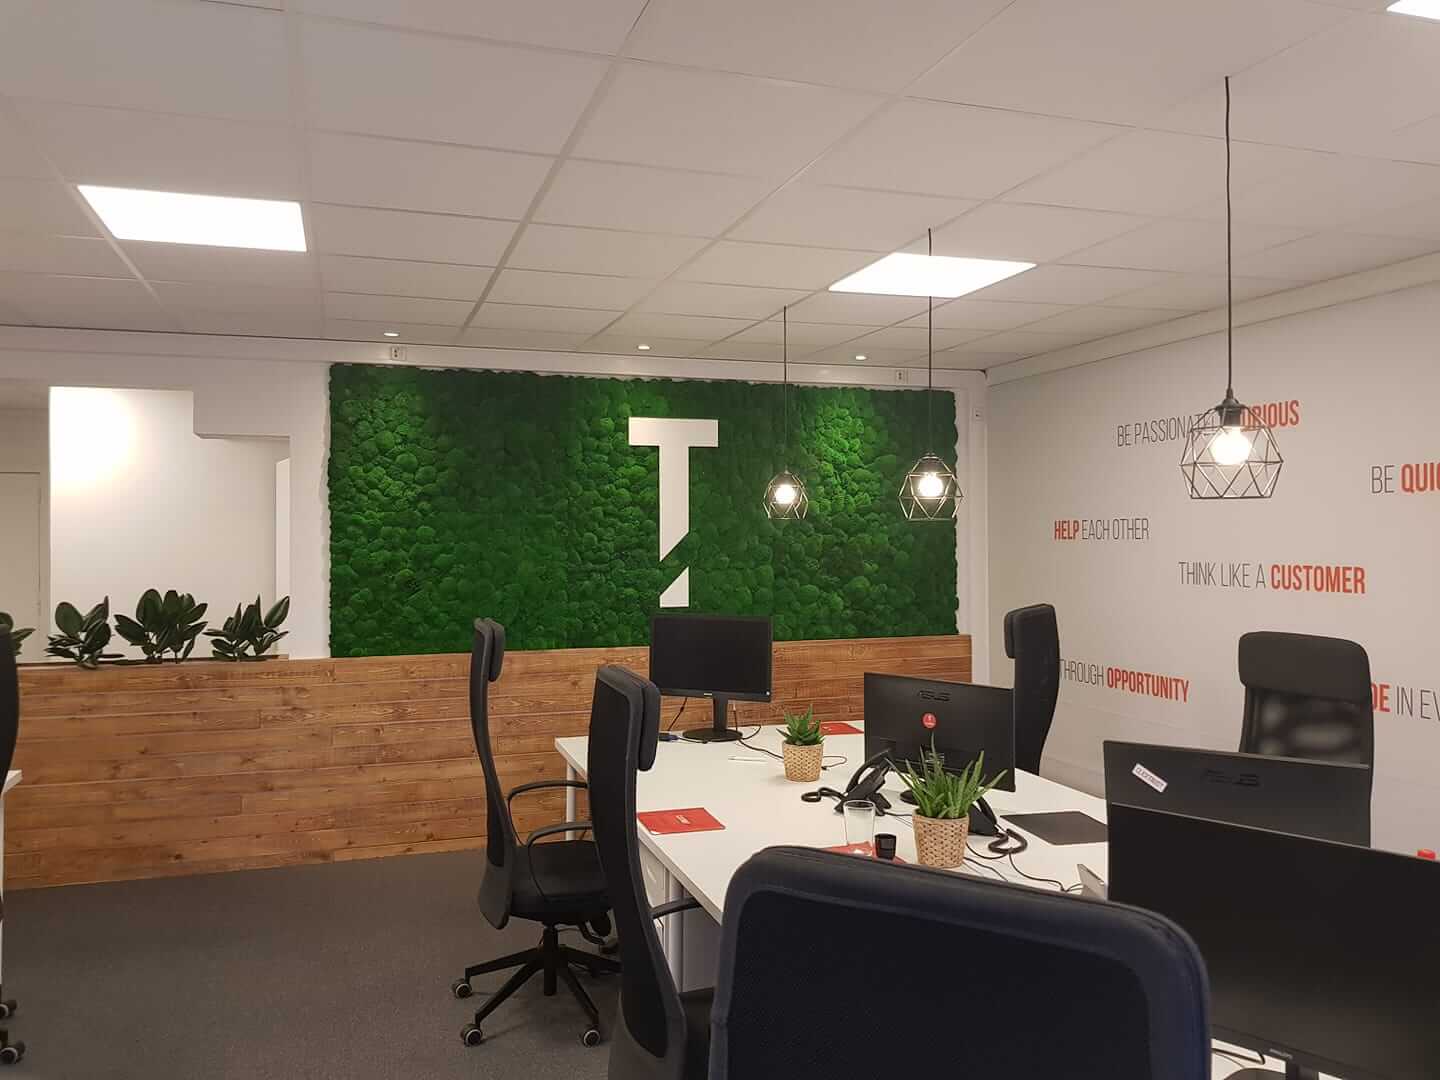 A look back on Q1 – New office, Malaga, a MASSIVE pitch and our goals.